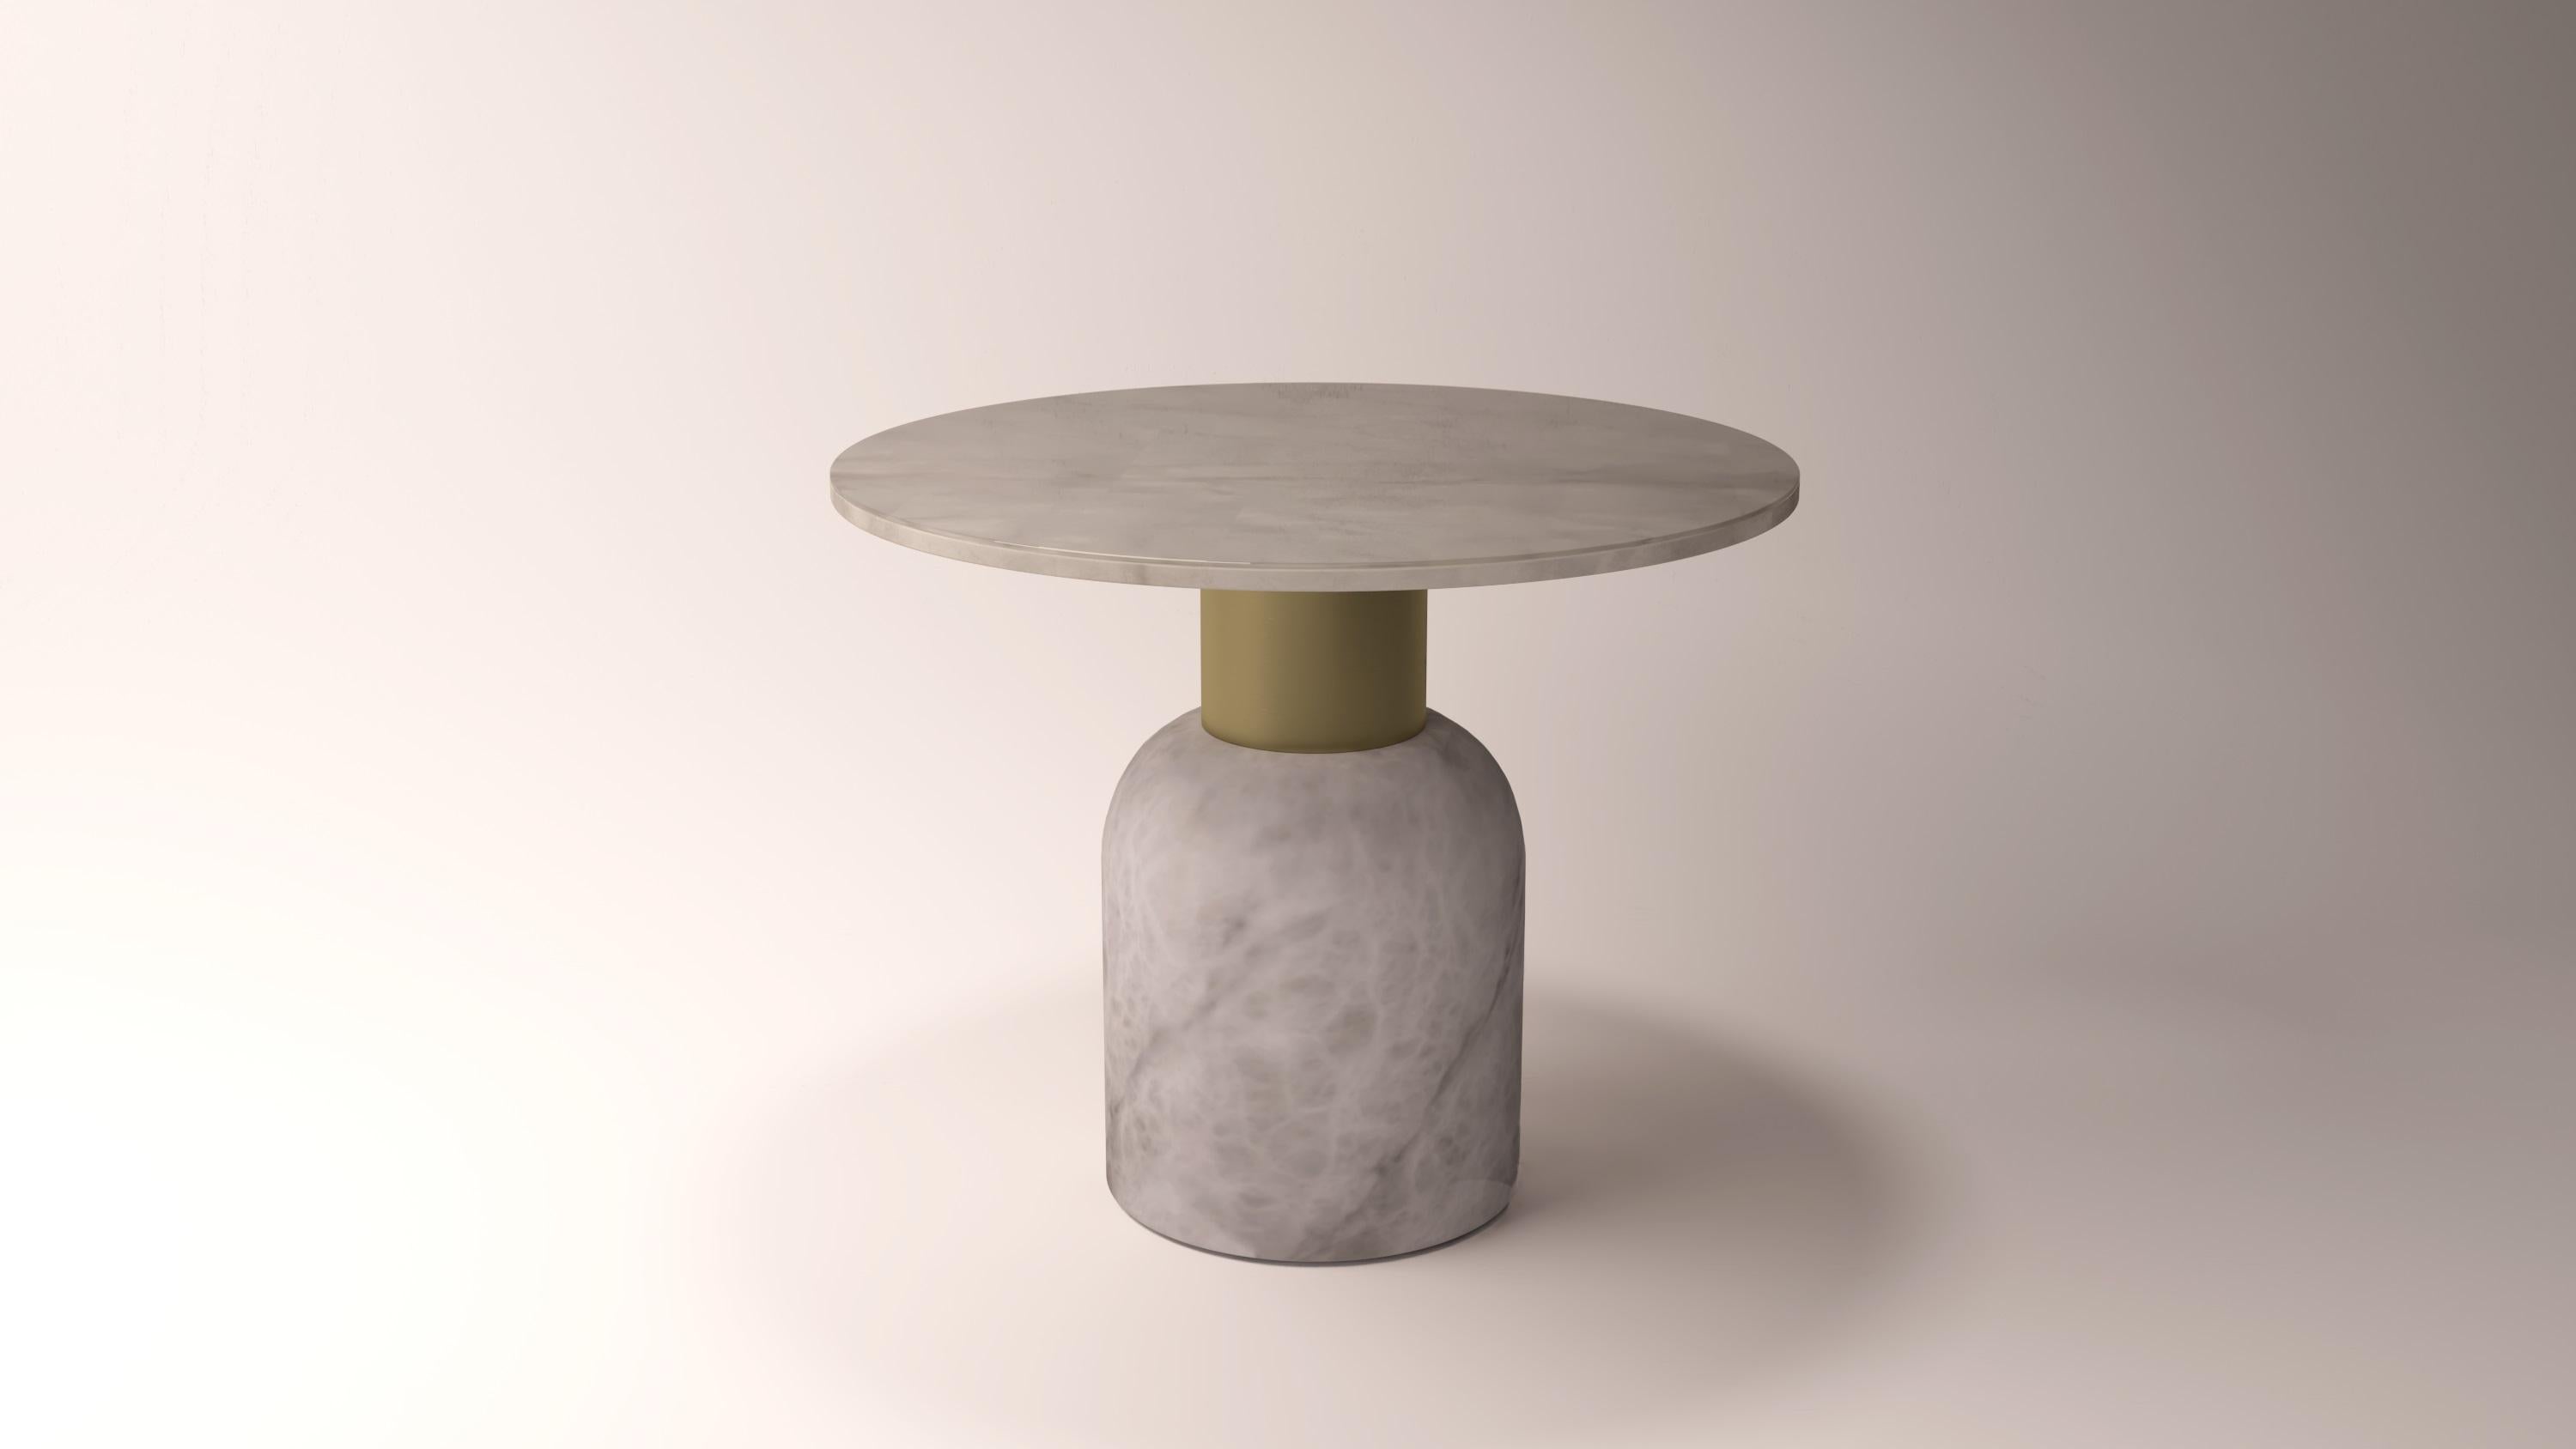 Serenity Fusion 40 AA Coffee Table by Alabastro Italiano
Dimensions: Ø 50 x H 40 cm.
Materials: White alabaster and brushed brass.

Available in white alabaster and iroko wood. Available in different finishes: Shiny Silver, Bronze, Brushed Brass,